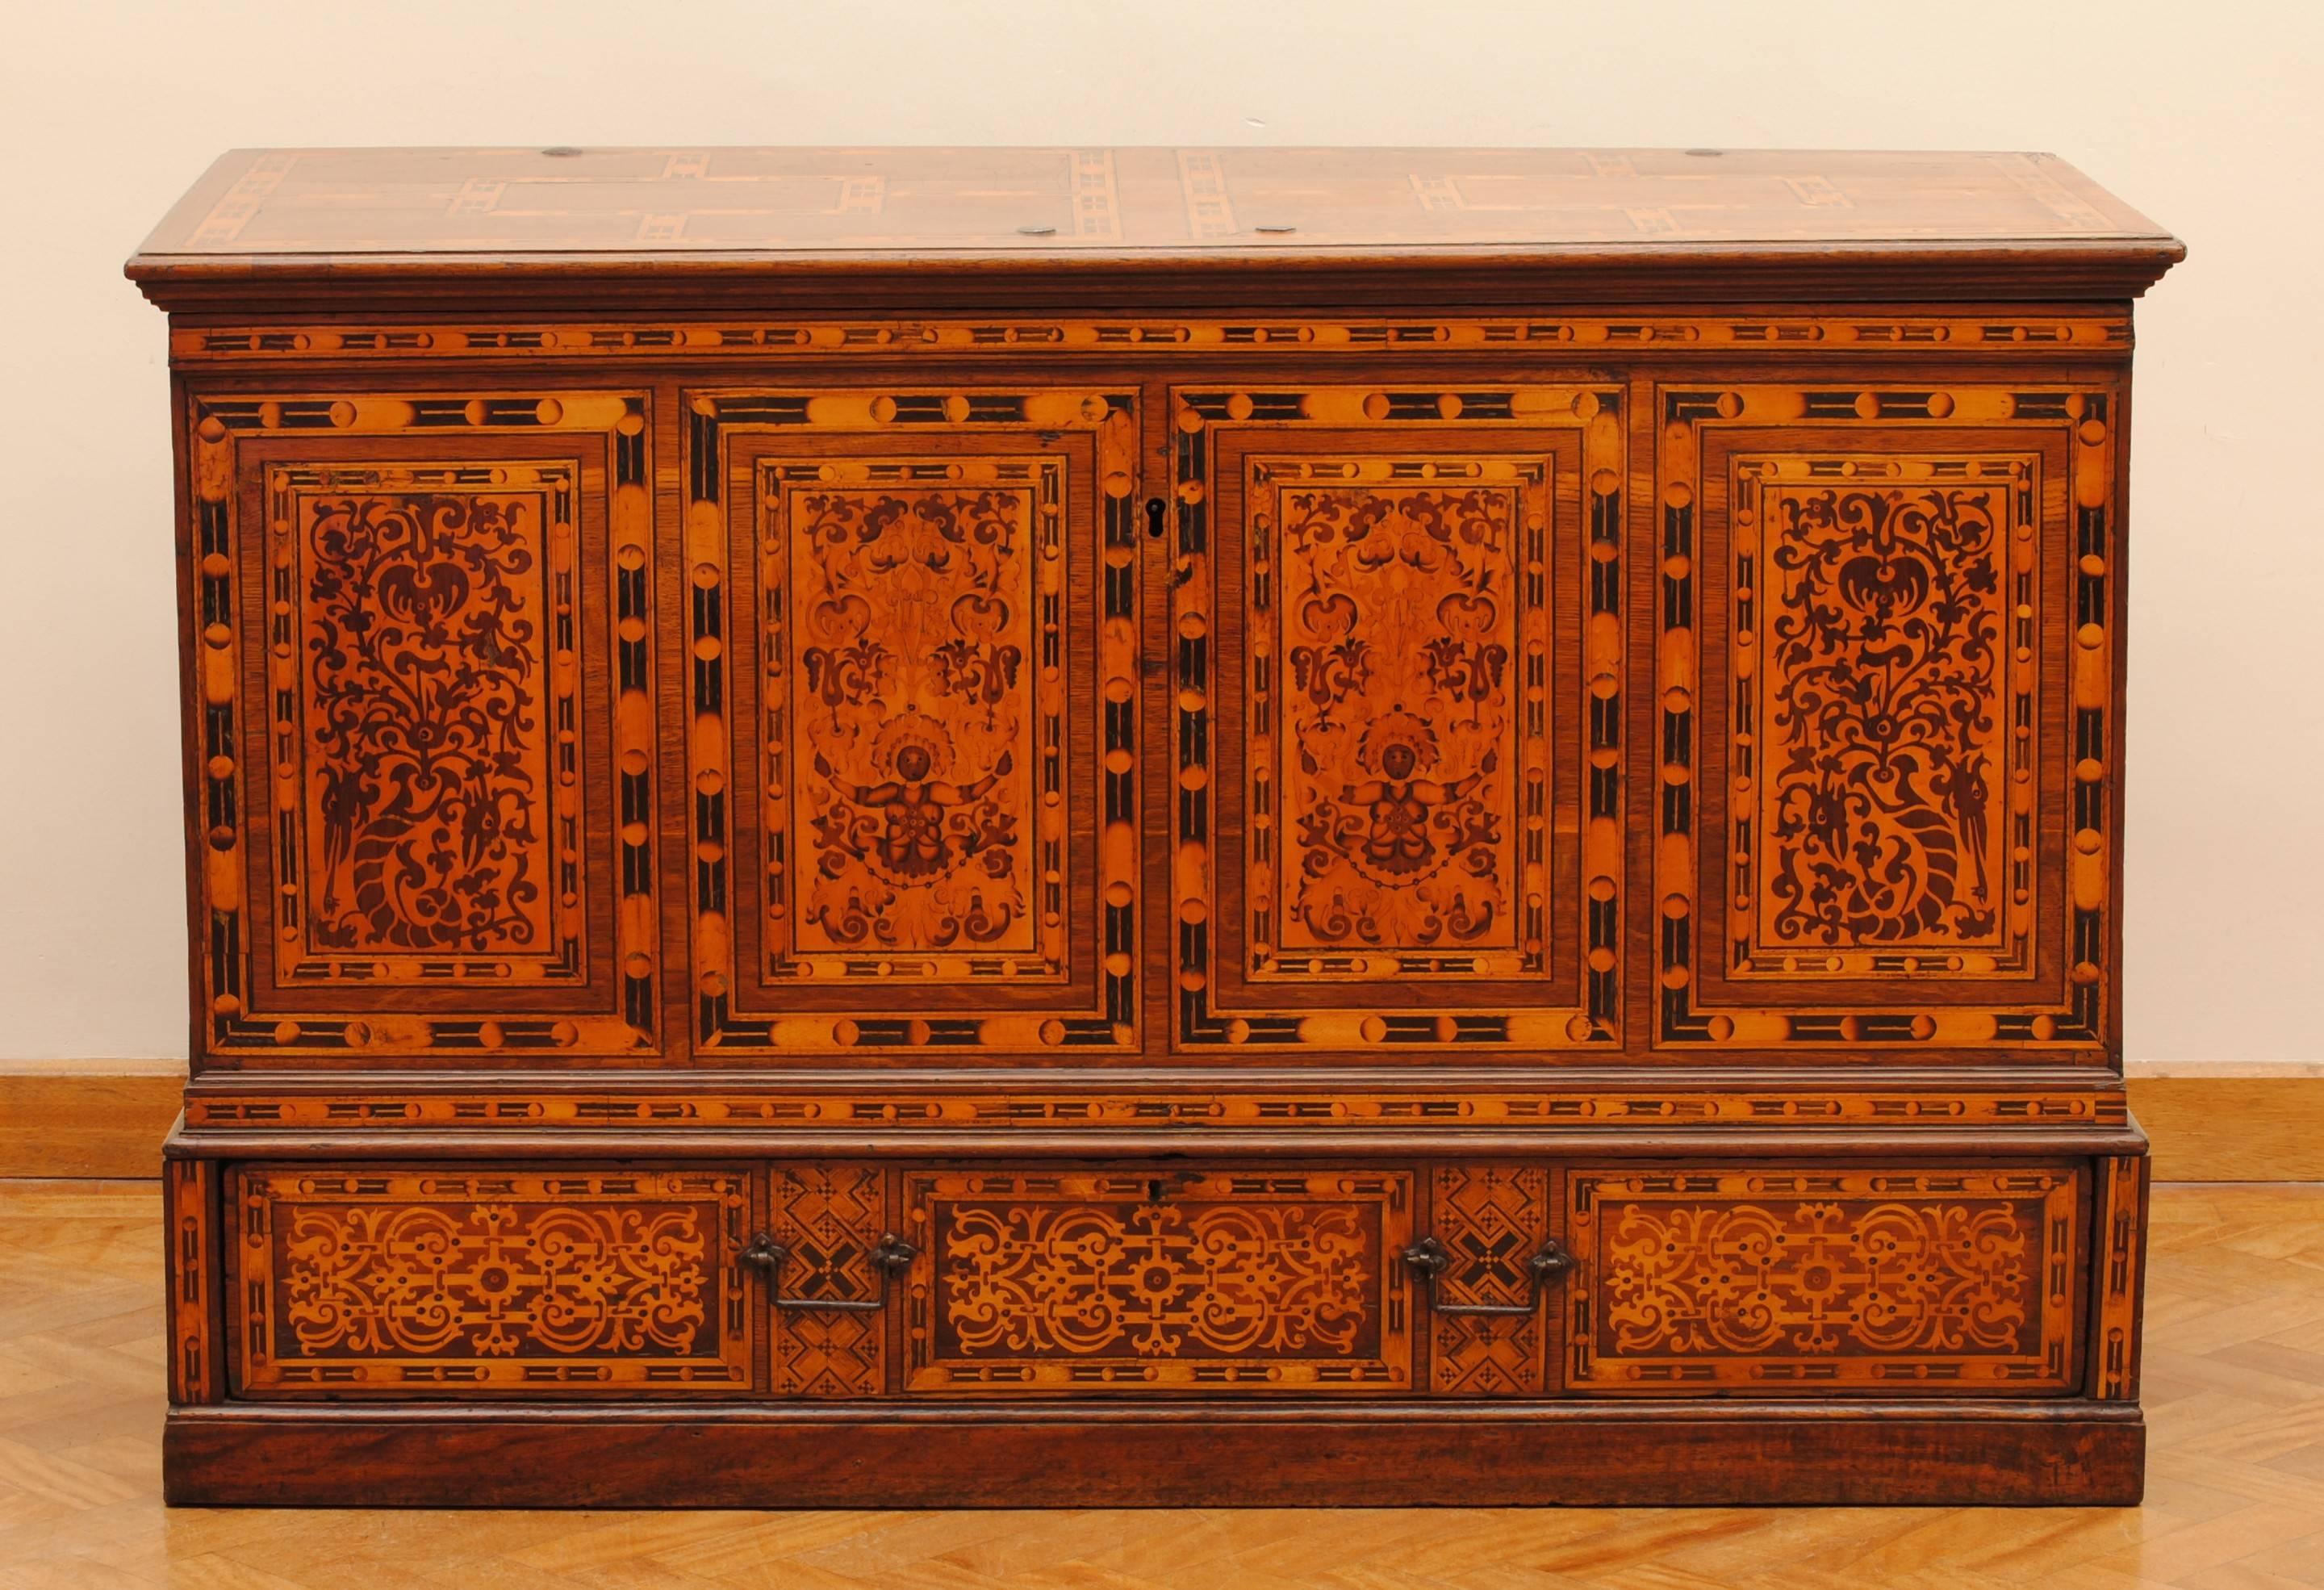 A fantastic German marquetry chest with fine marquetry inlaid decoration.